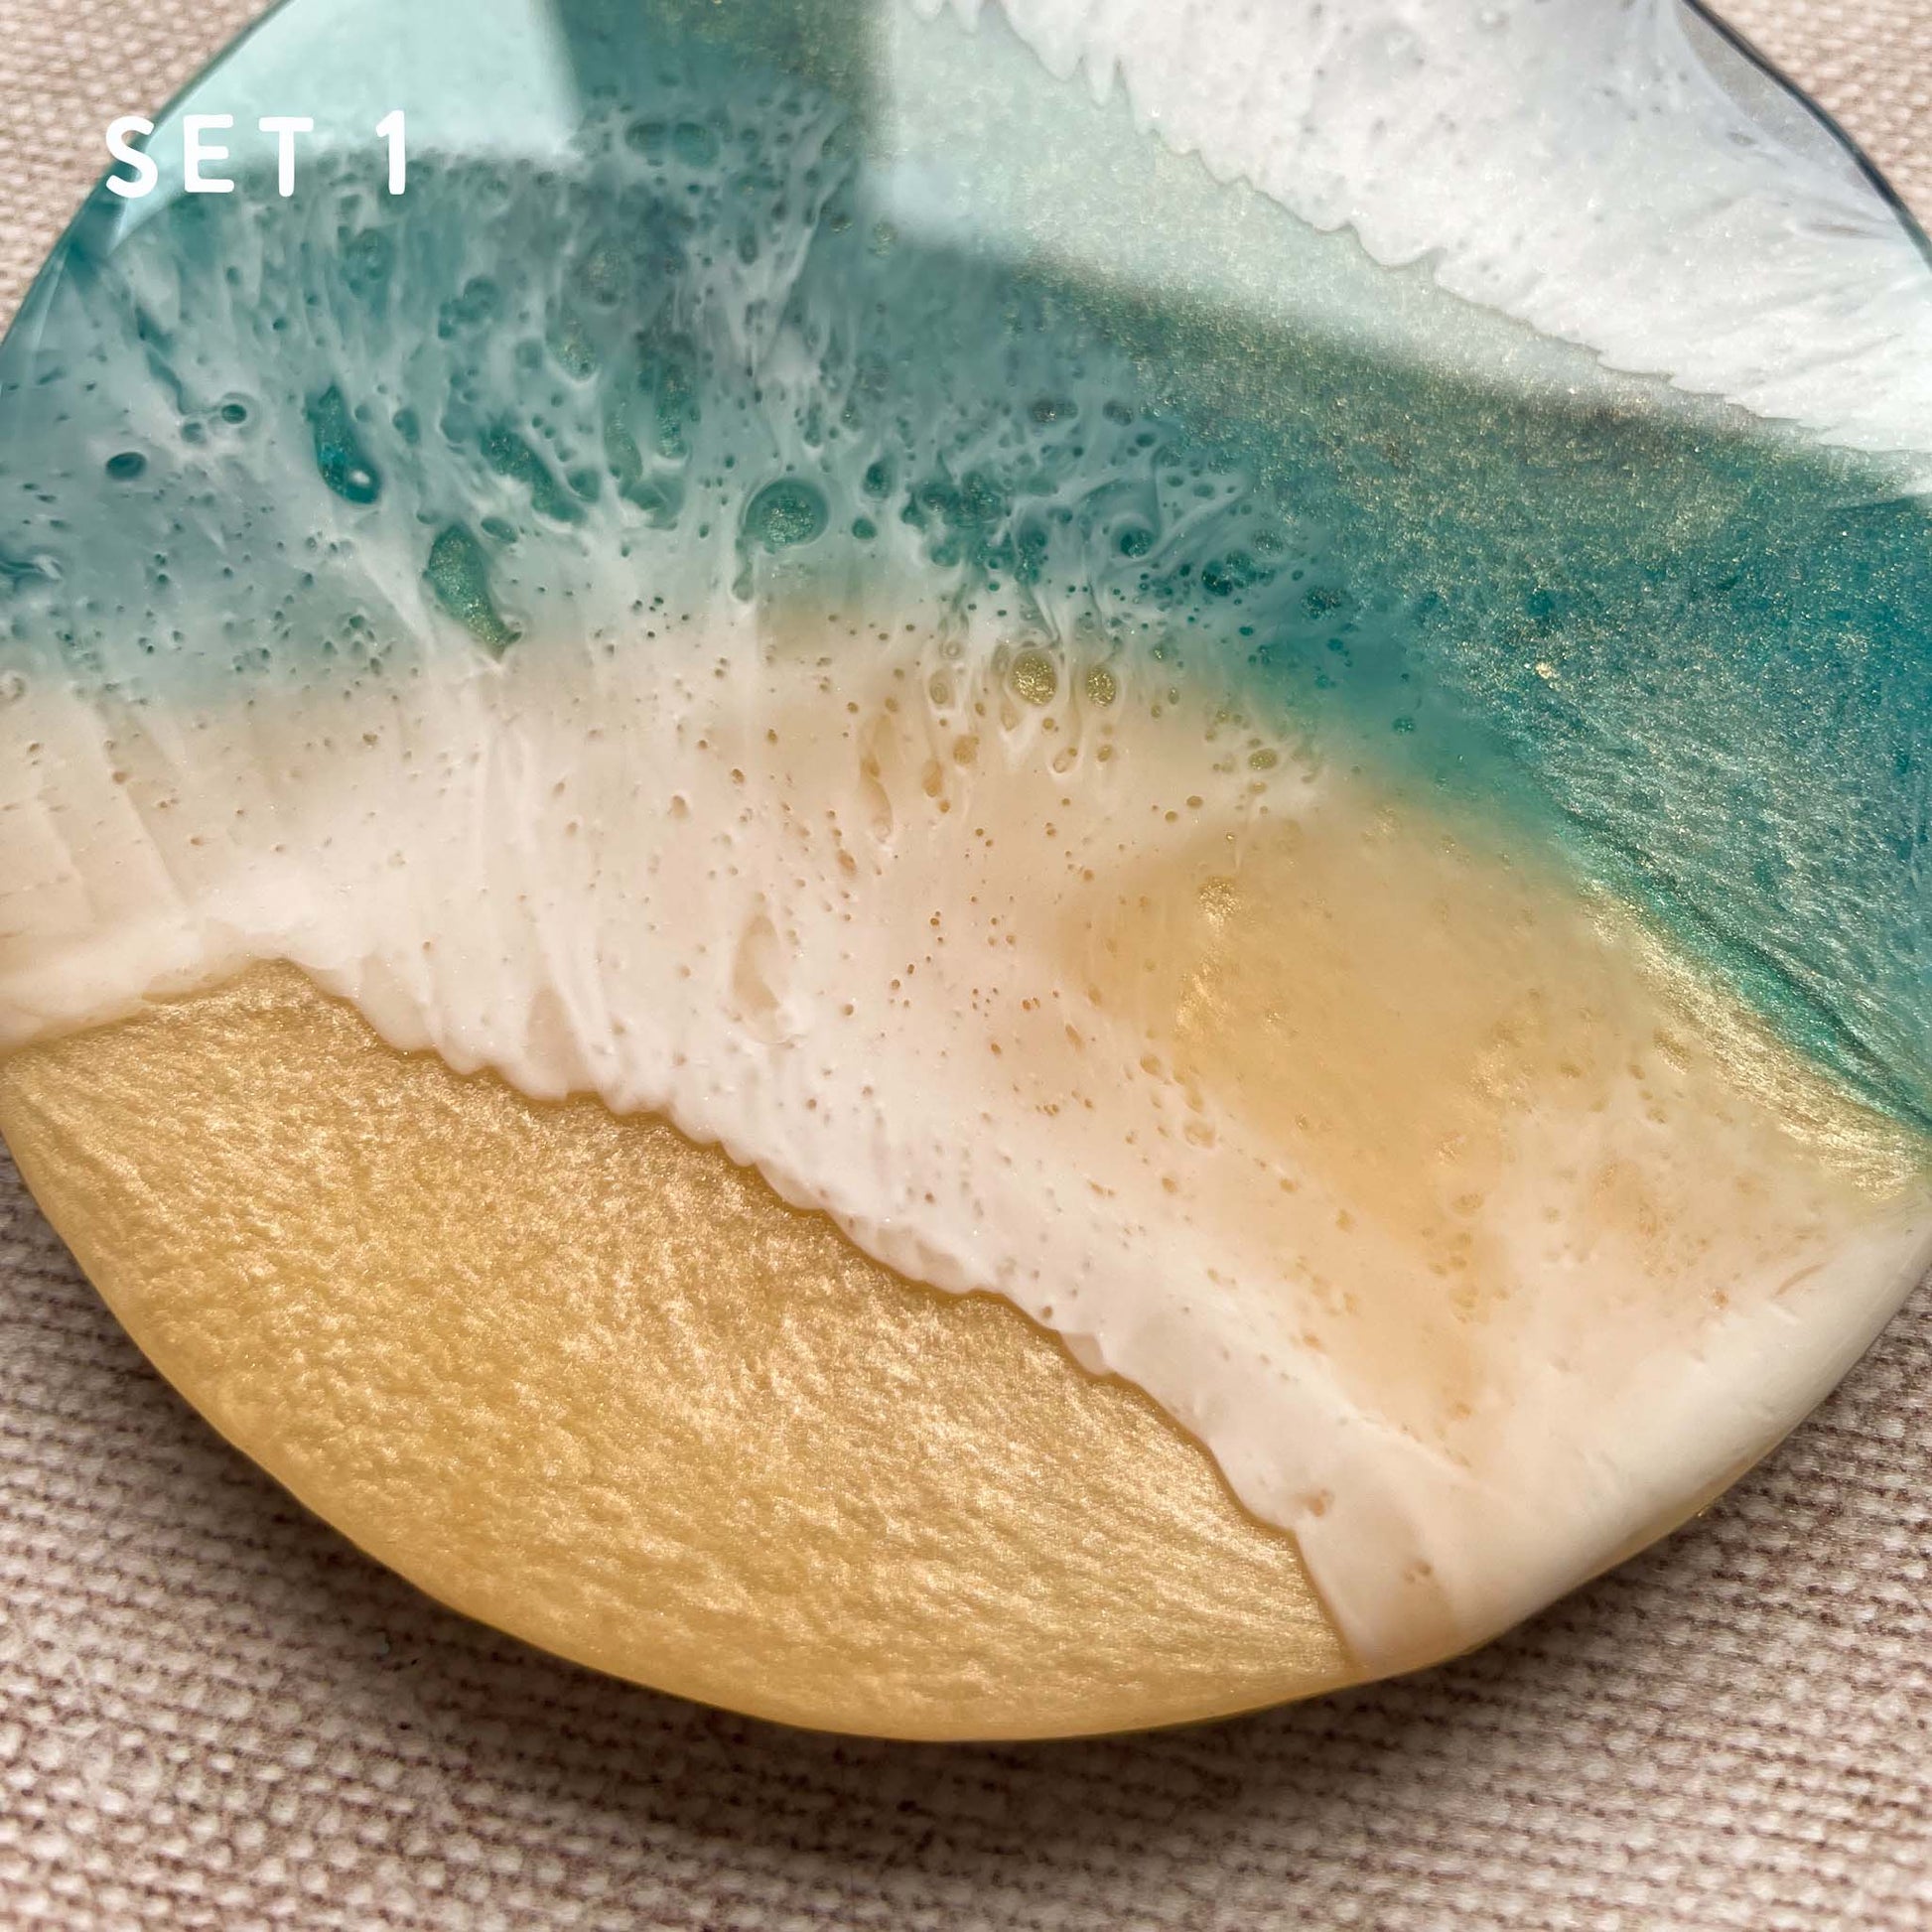 Celebrate Christmas with the beauty of the ocean - gift this stunning coaster set to your loved ones.